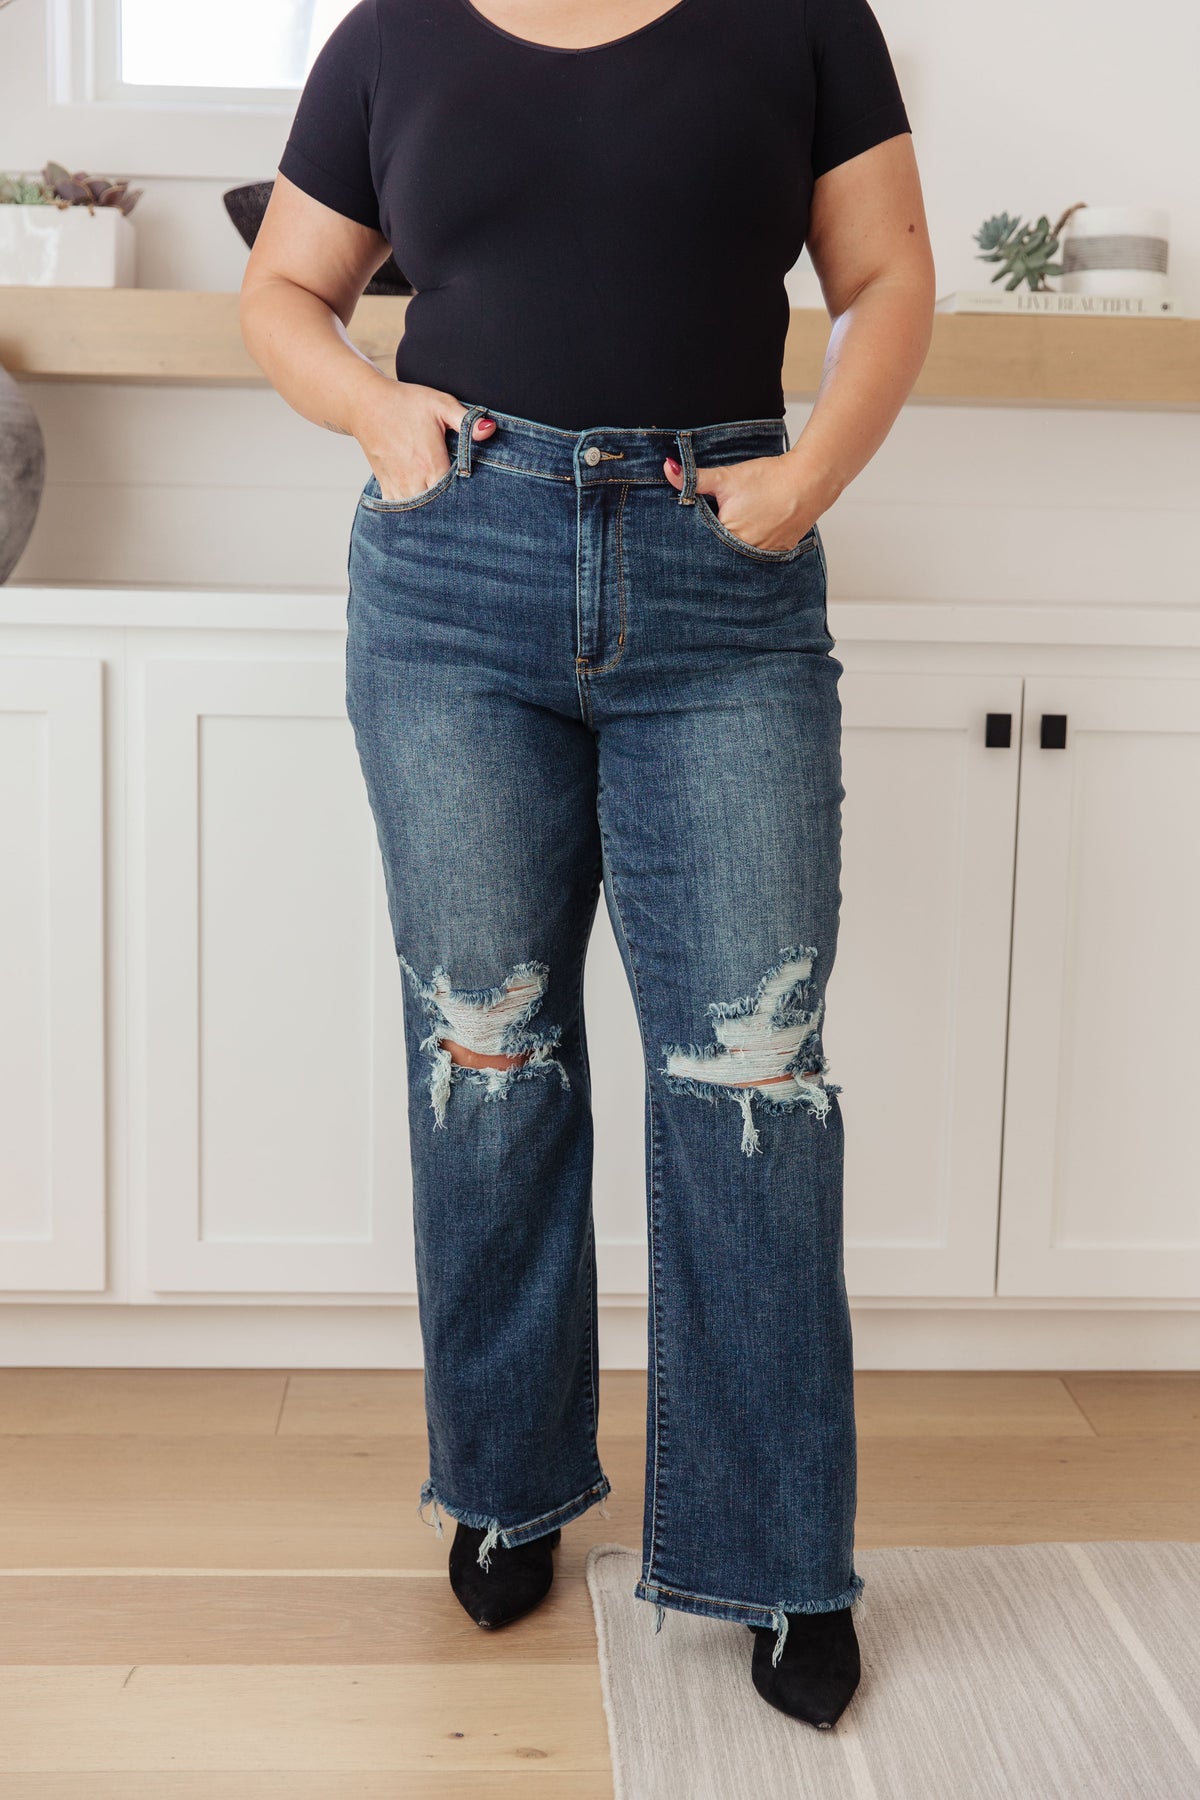 High Rise 90's Straight Jeans in Dark Wash by Judy Blue